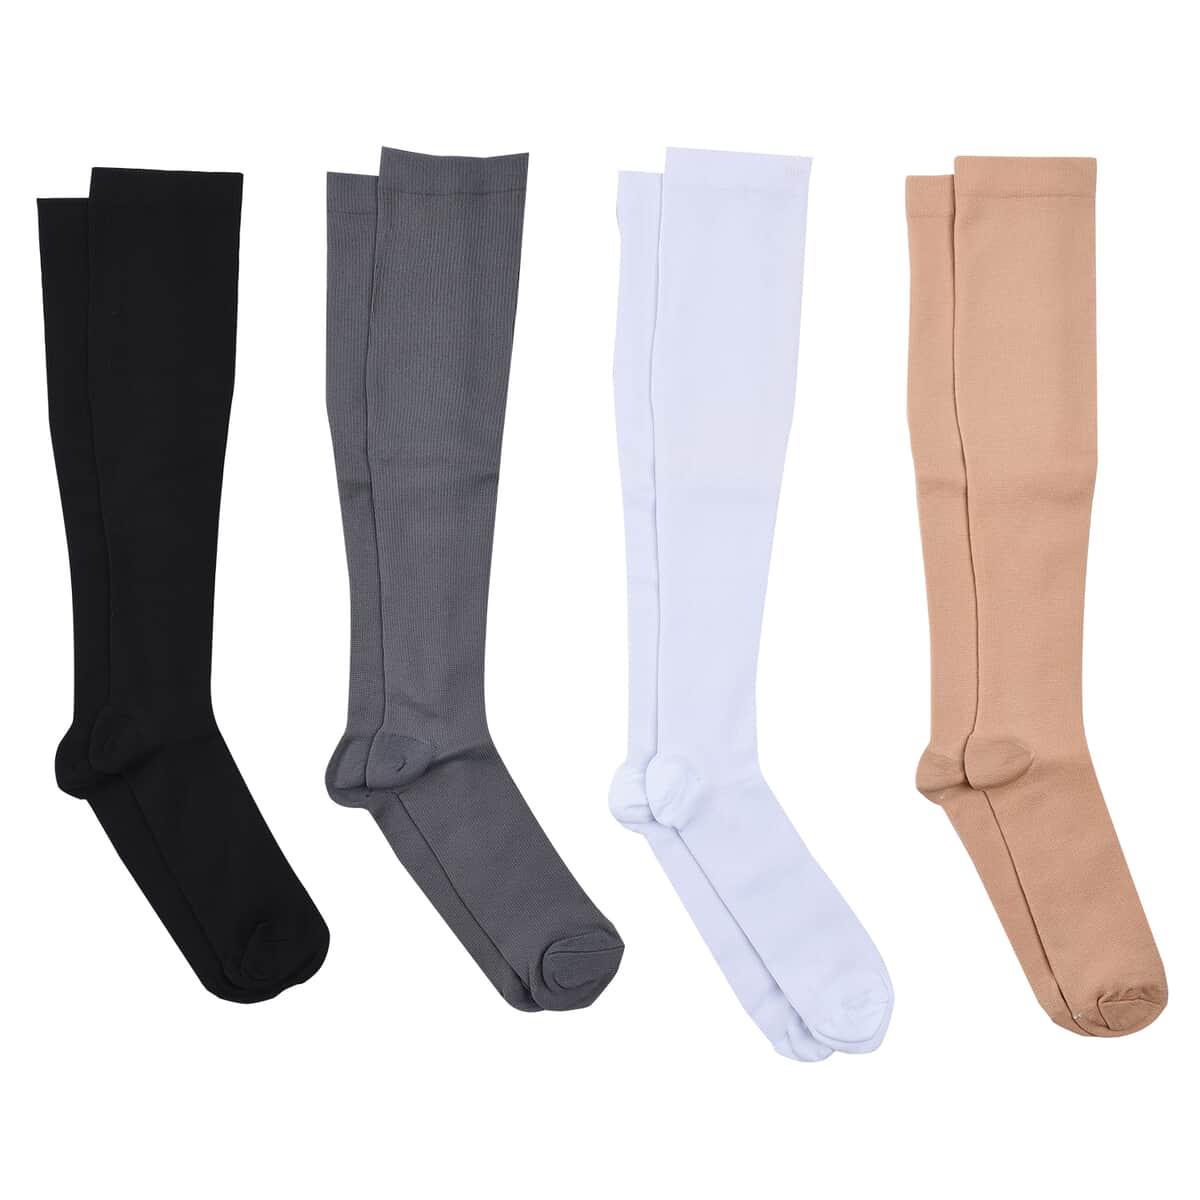 Set of 4 Pairs Knee Length Copper Infused Compression Socks - Classic Multi Color (S/M) image number 0